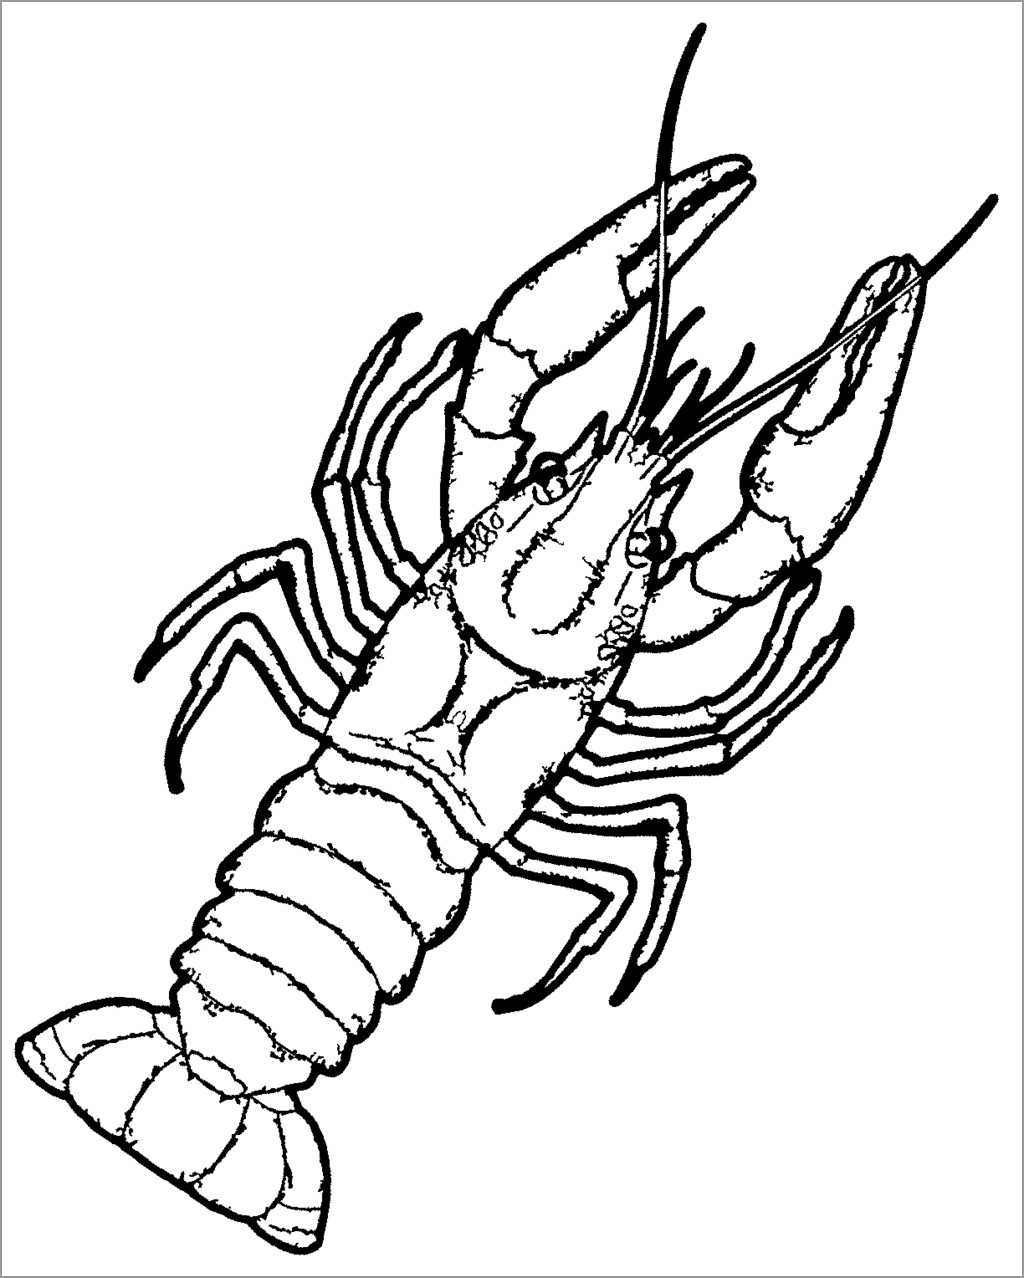 Lobster Coloring Pages - ColoringBay